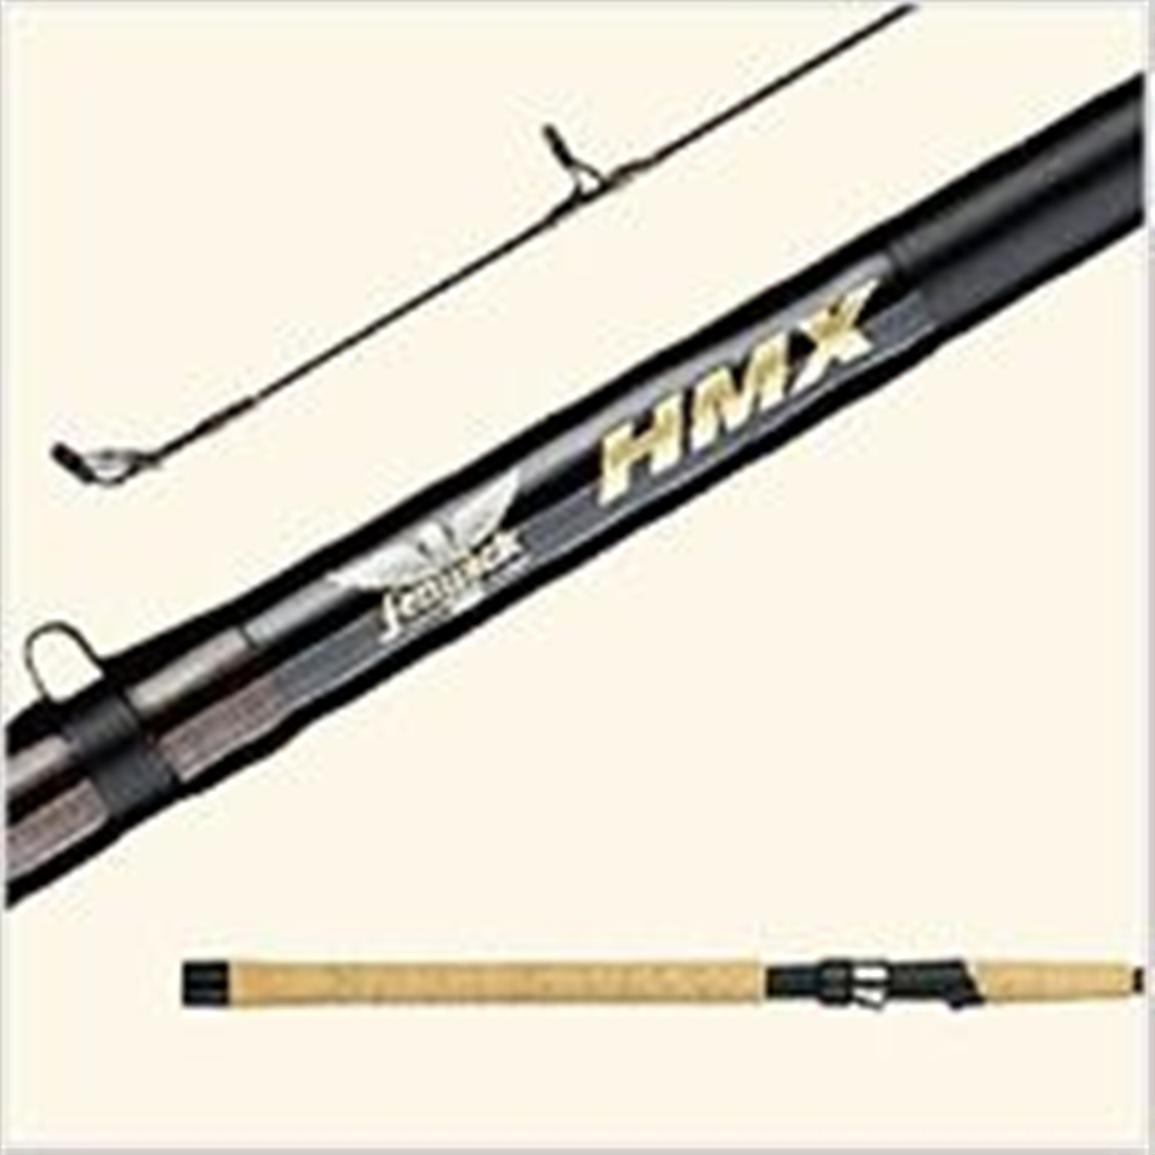 fenwick hmx spinning rod review Offers online OFF 64%